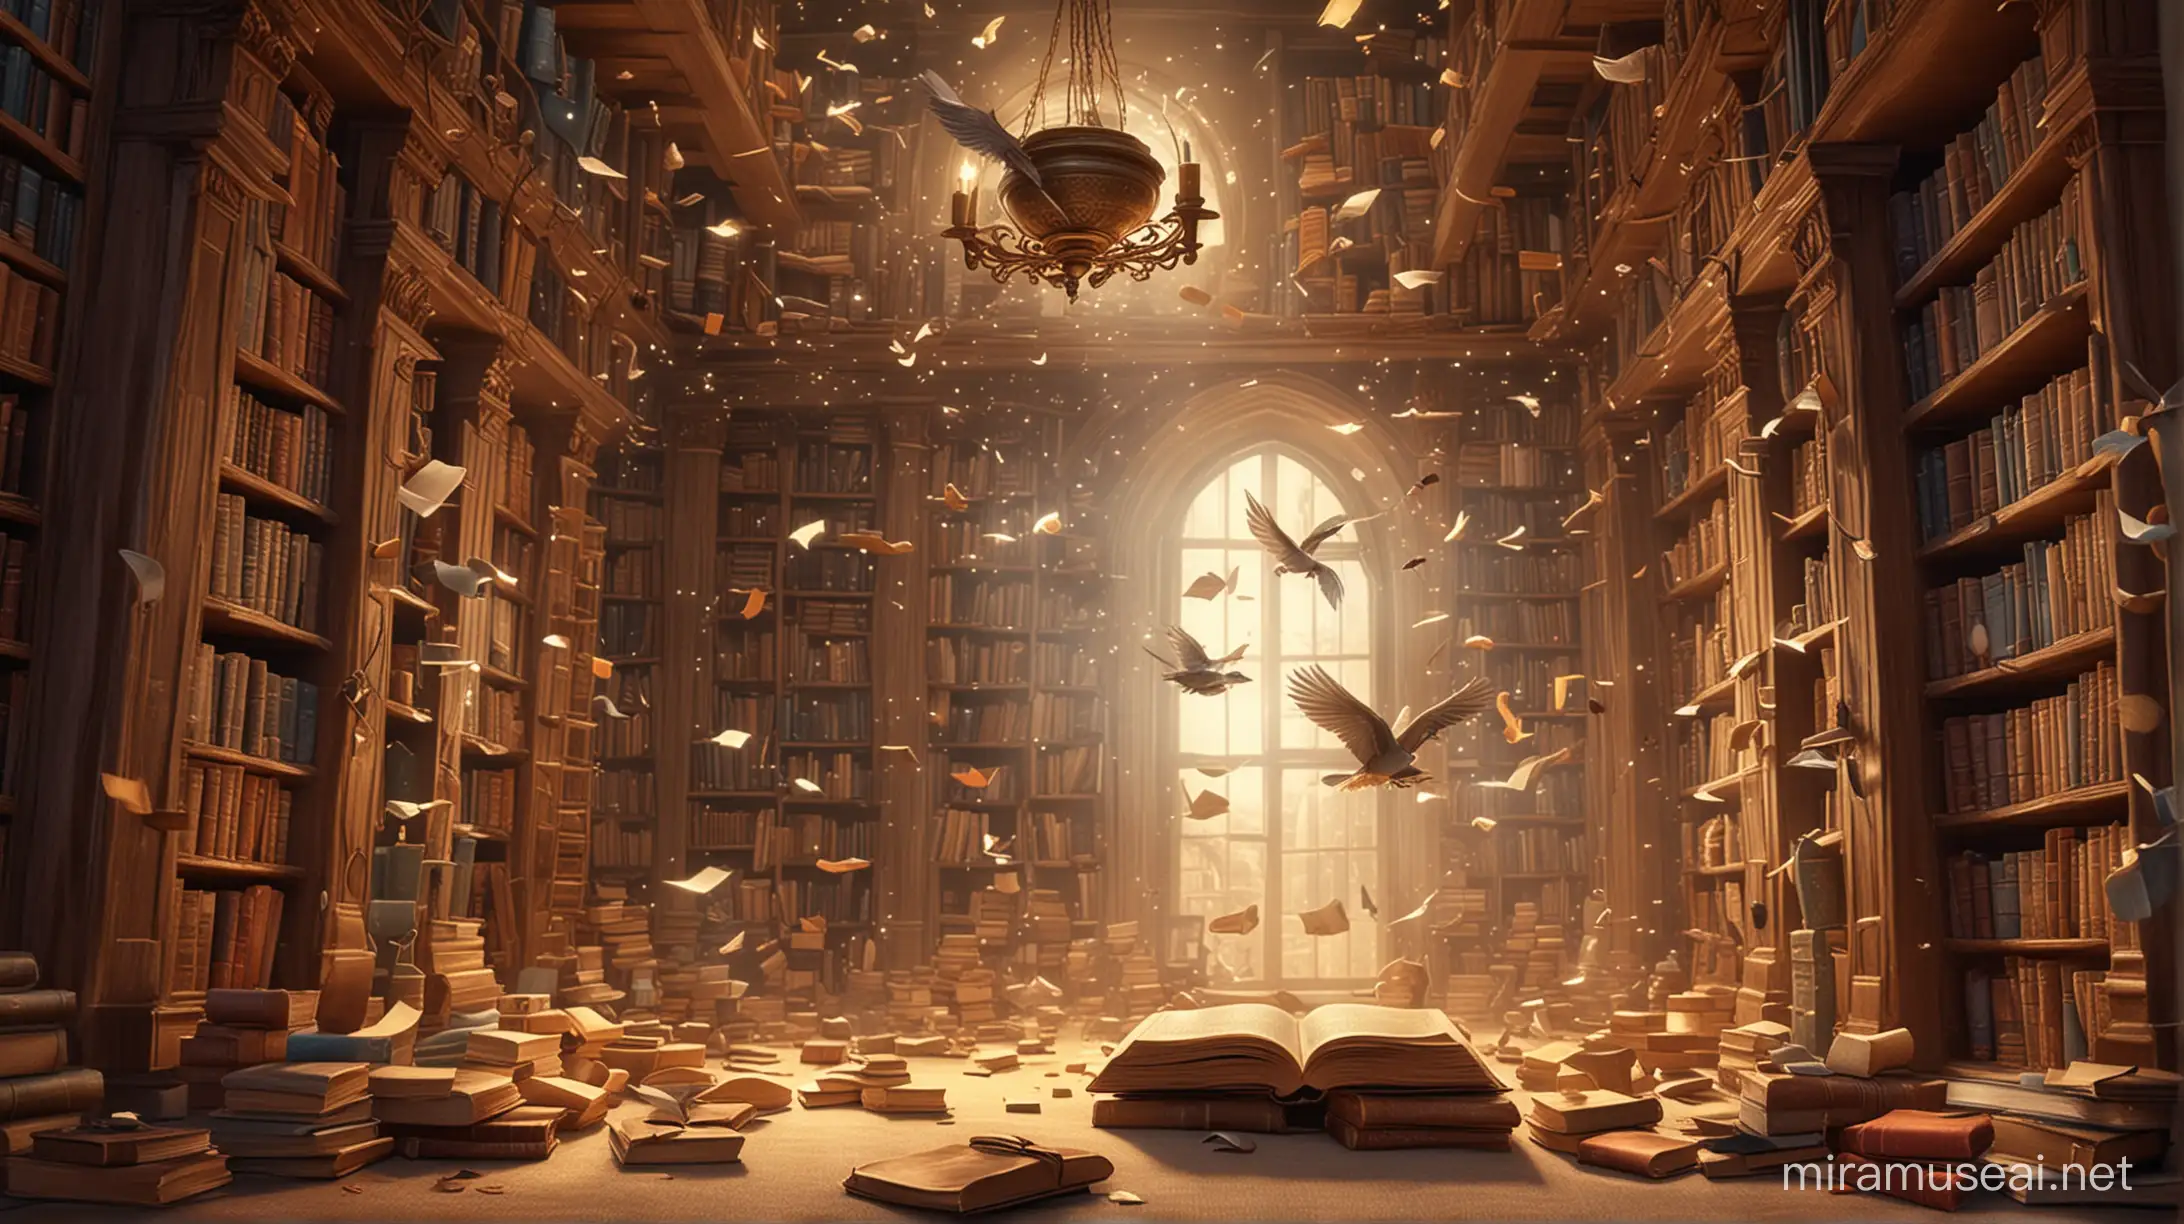 Enchanted library, books flying and tales coming alive, in a magical realism style